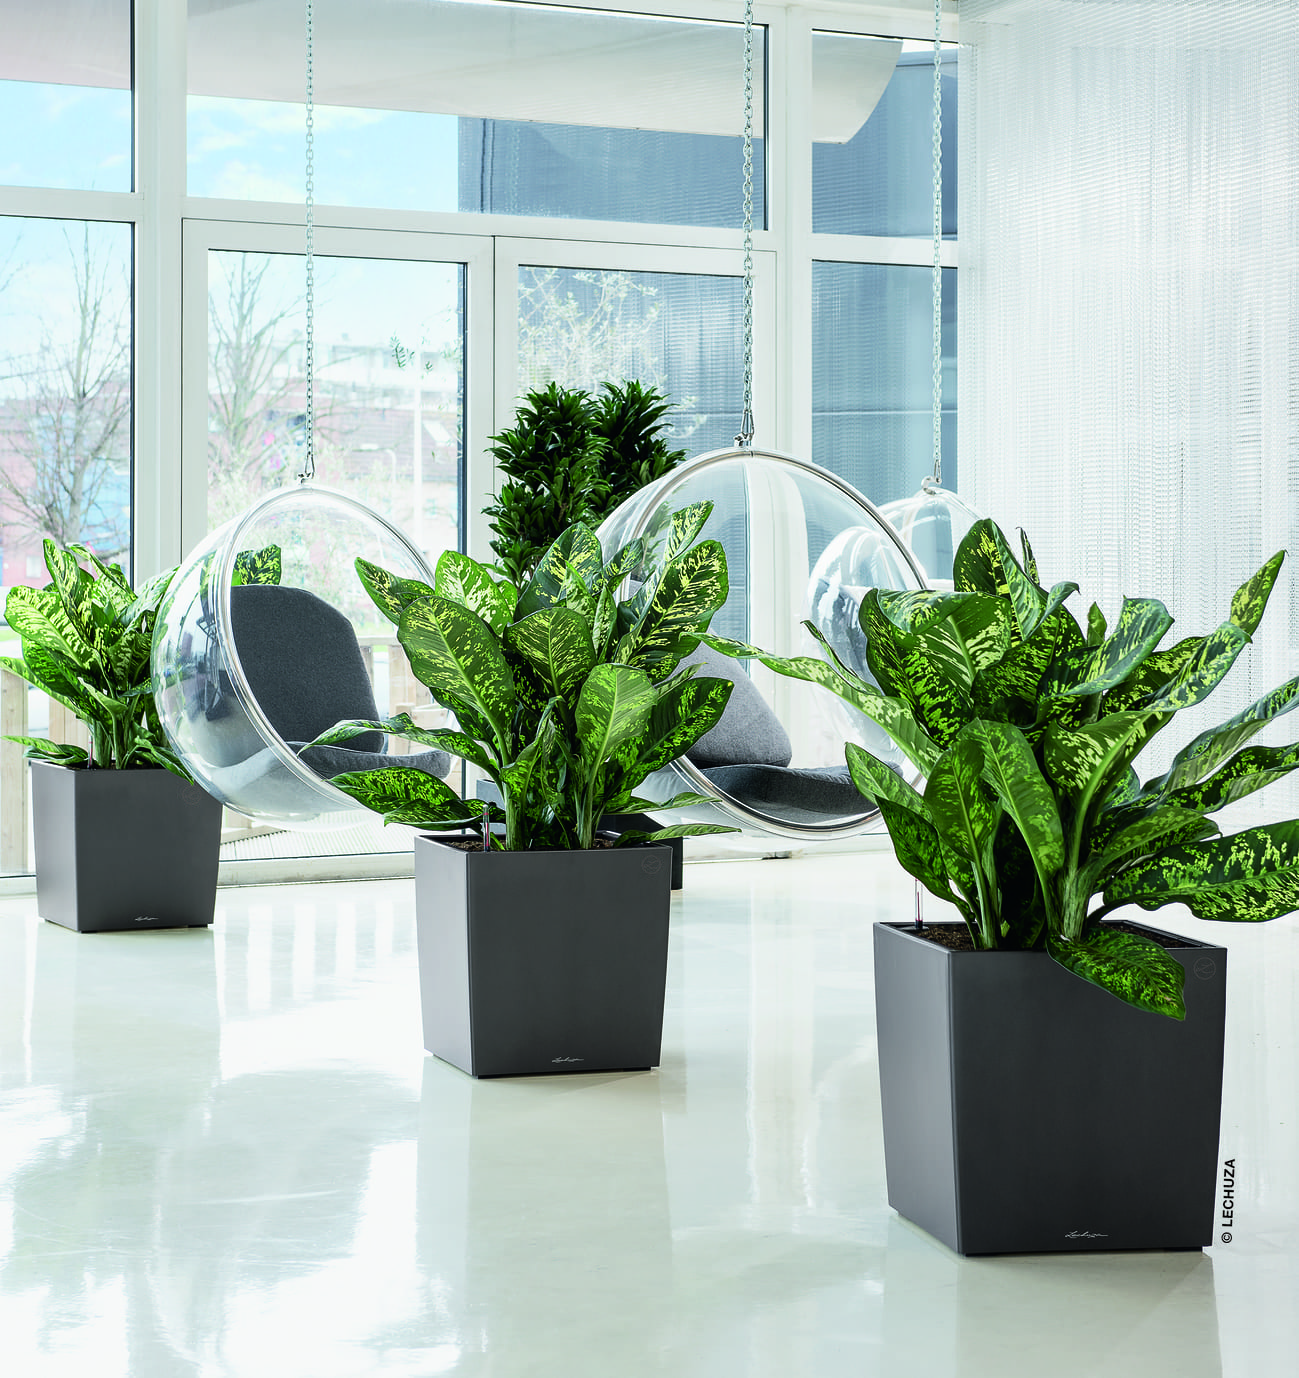 From minimalistic to spectacular: choosing planters  for different office spaces